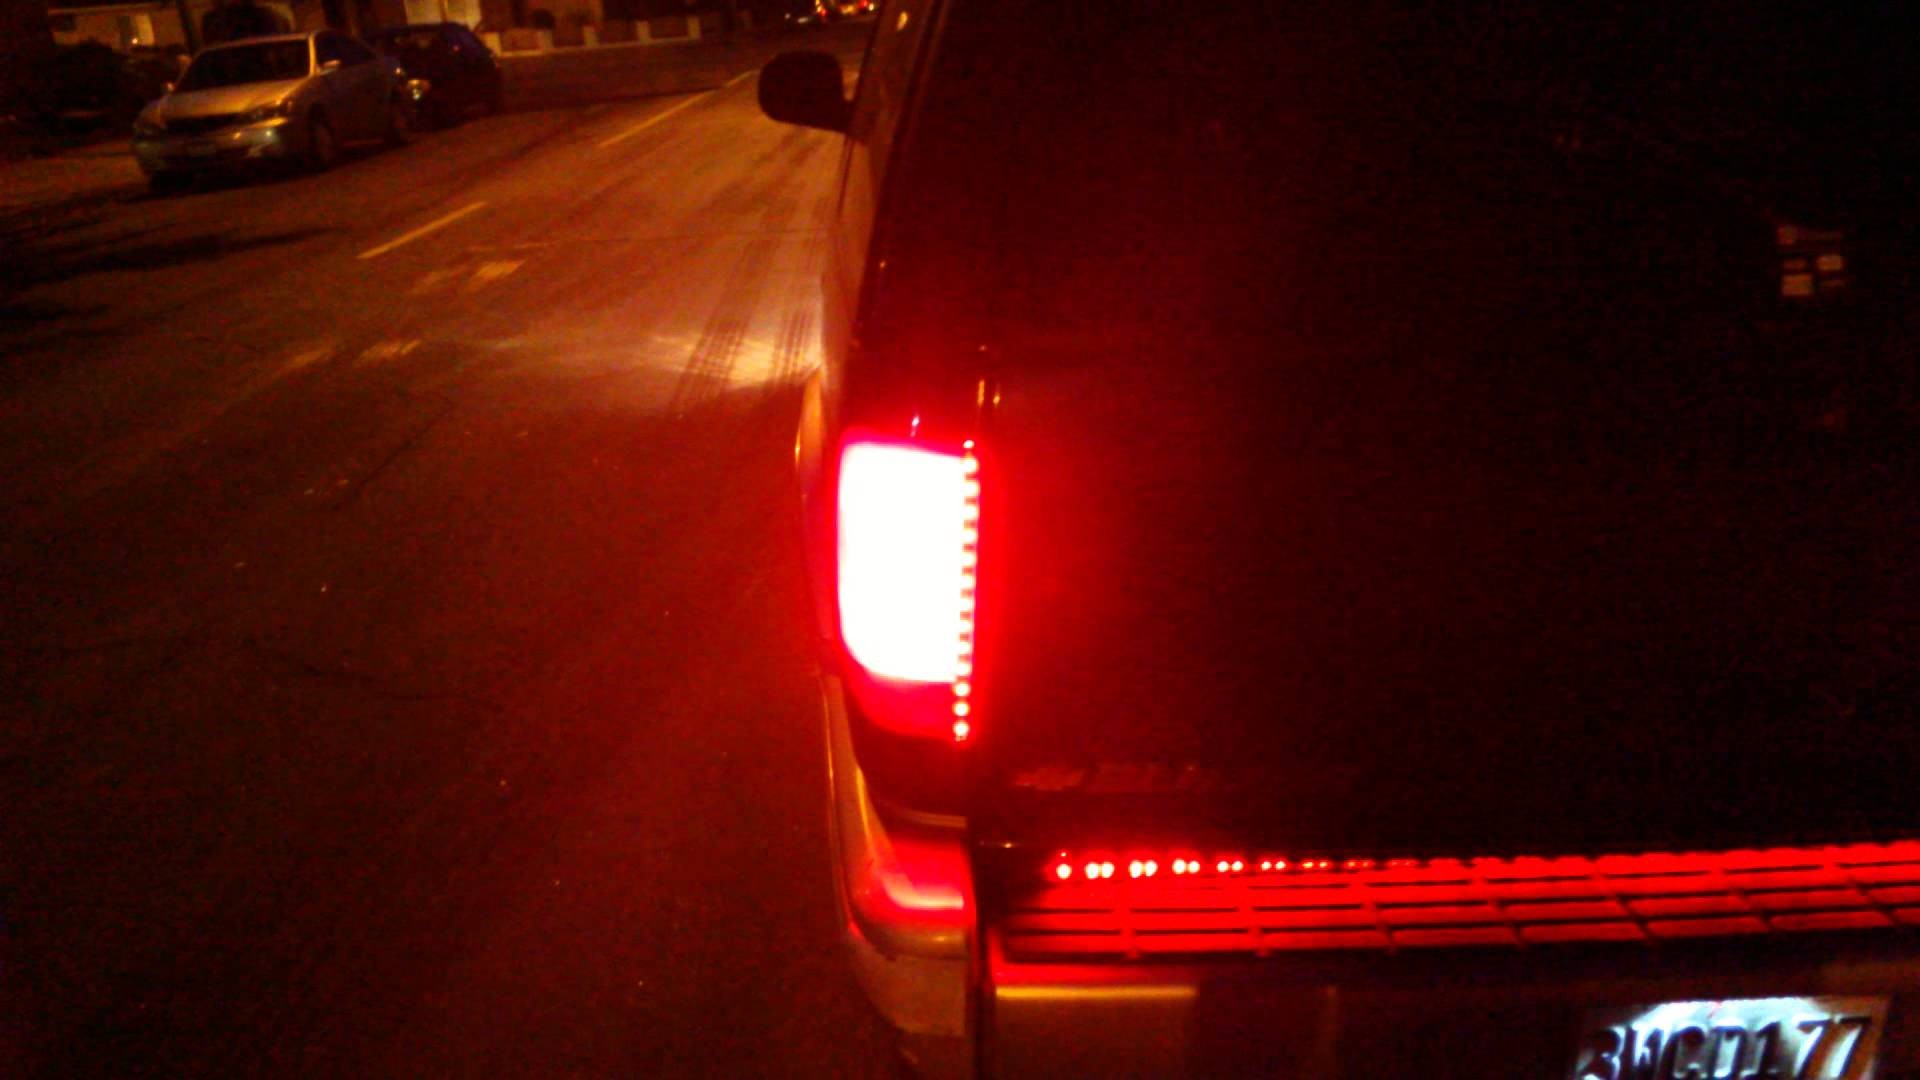 1997 S10 Blazer with led taillights